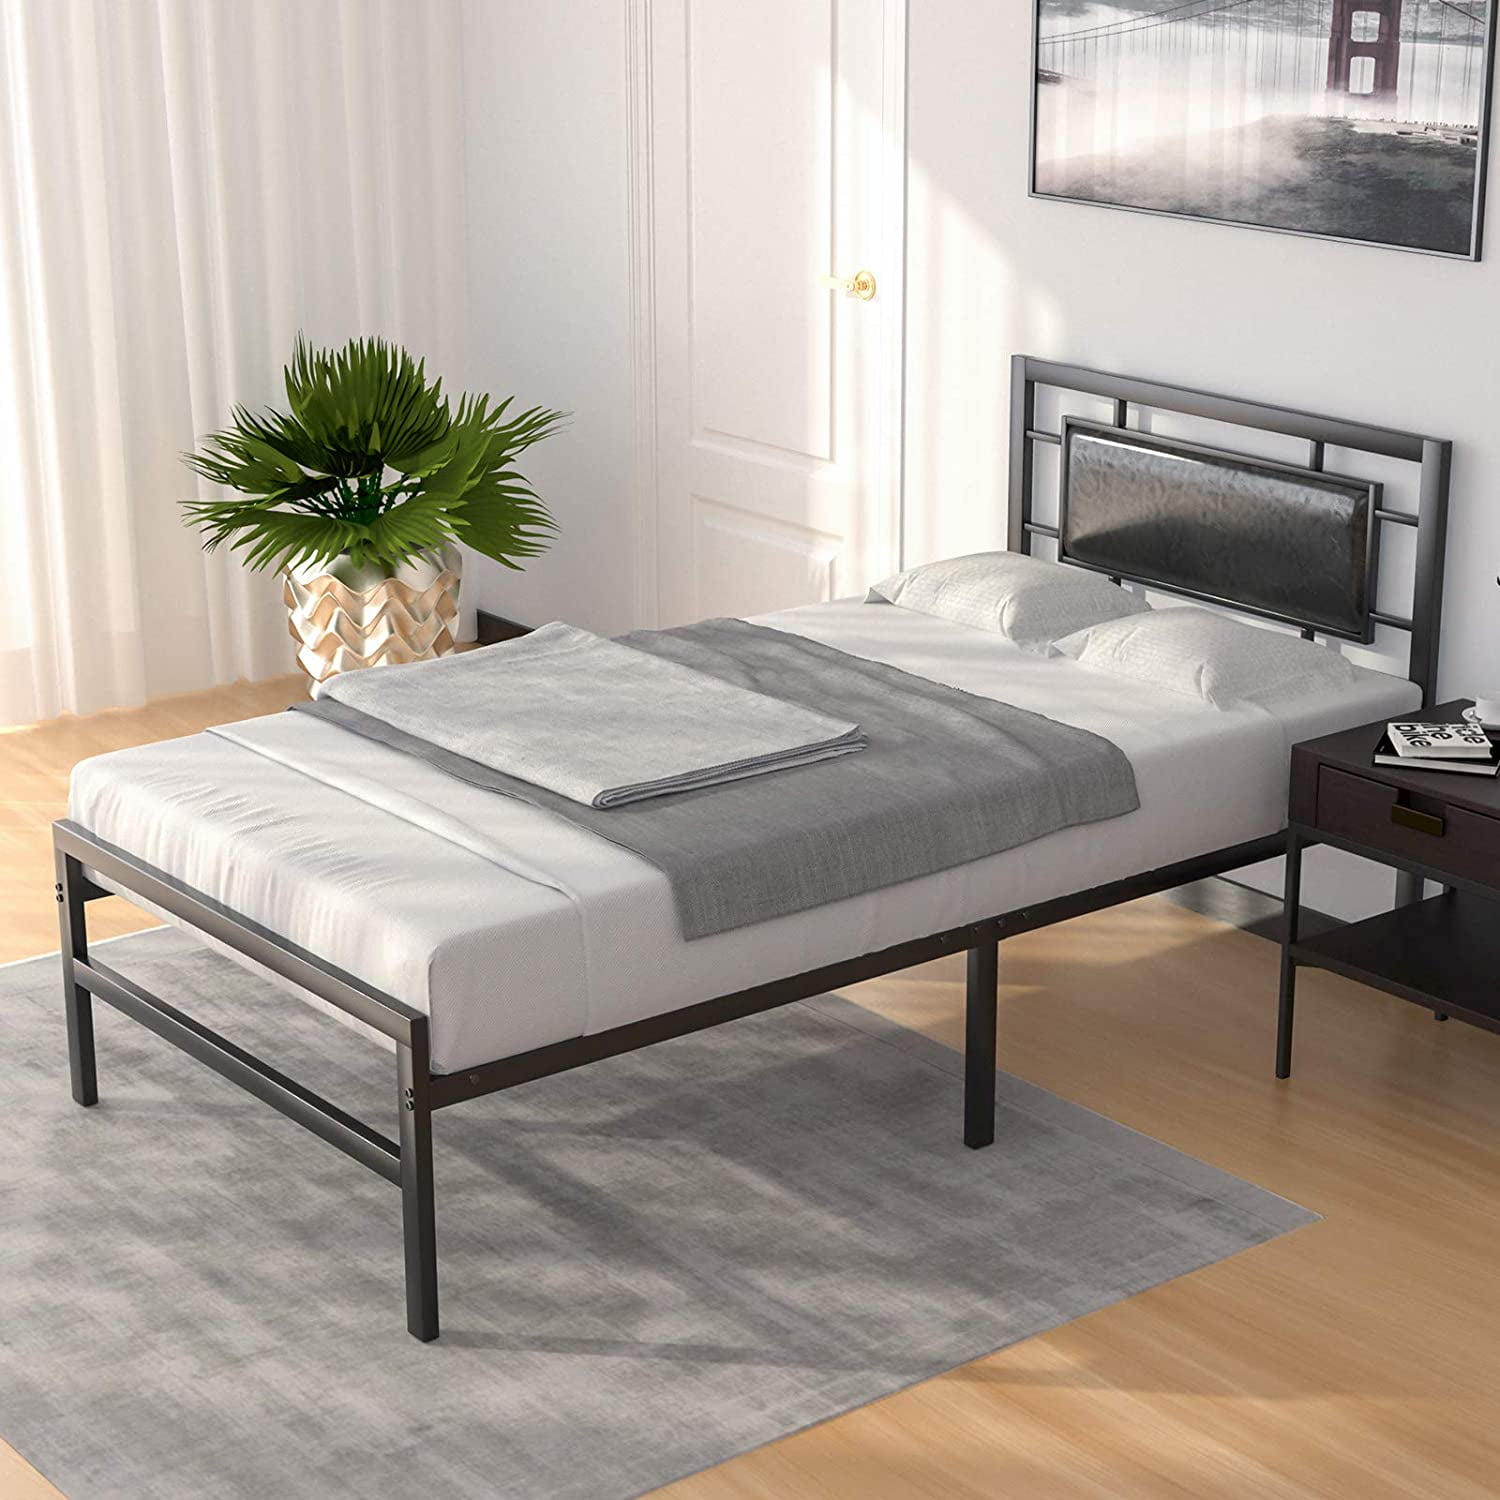 Mecor Vintage Metal Twin Bed Frame, Twin Leather Bed Frame